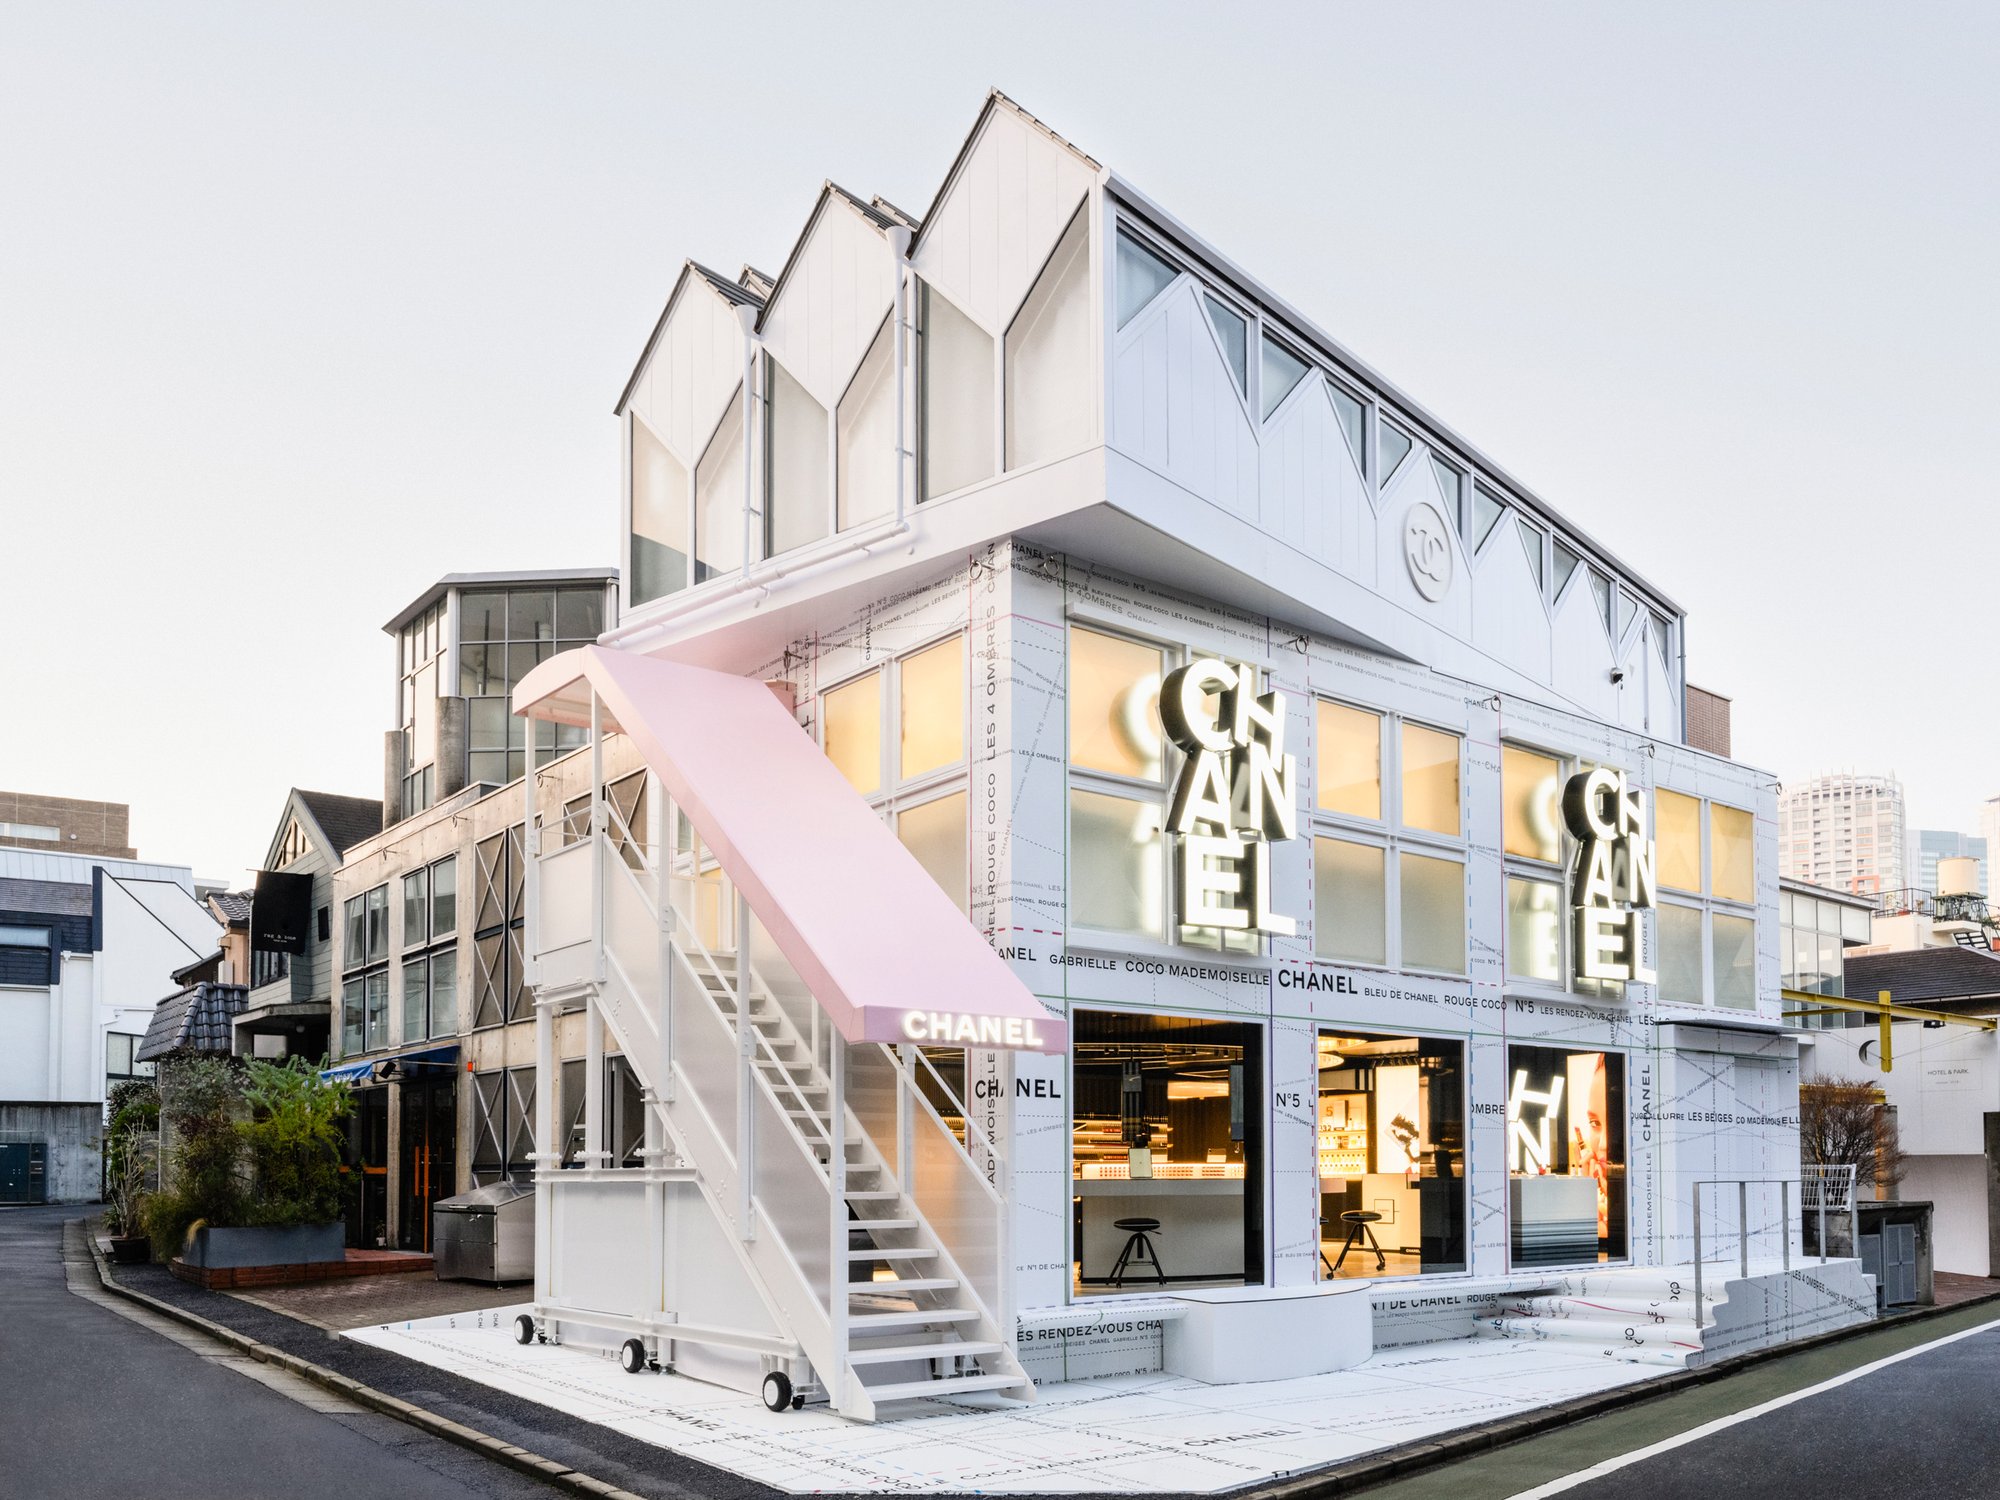 Chanel opens Rouge Coco Gloss lipstick cafe pop-up in Omotesando